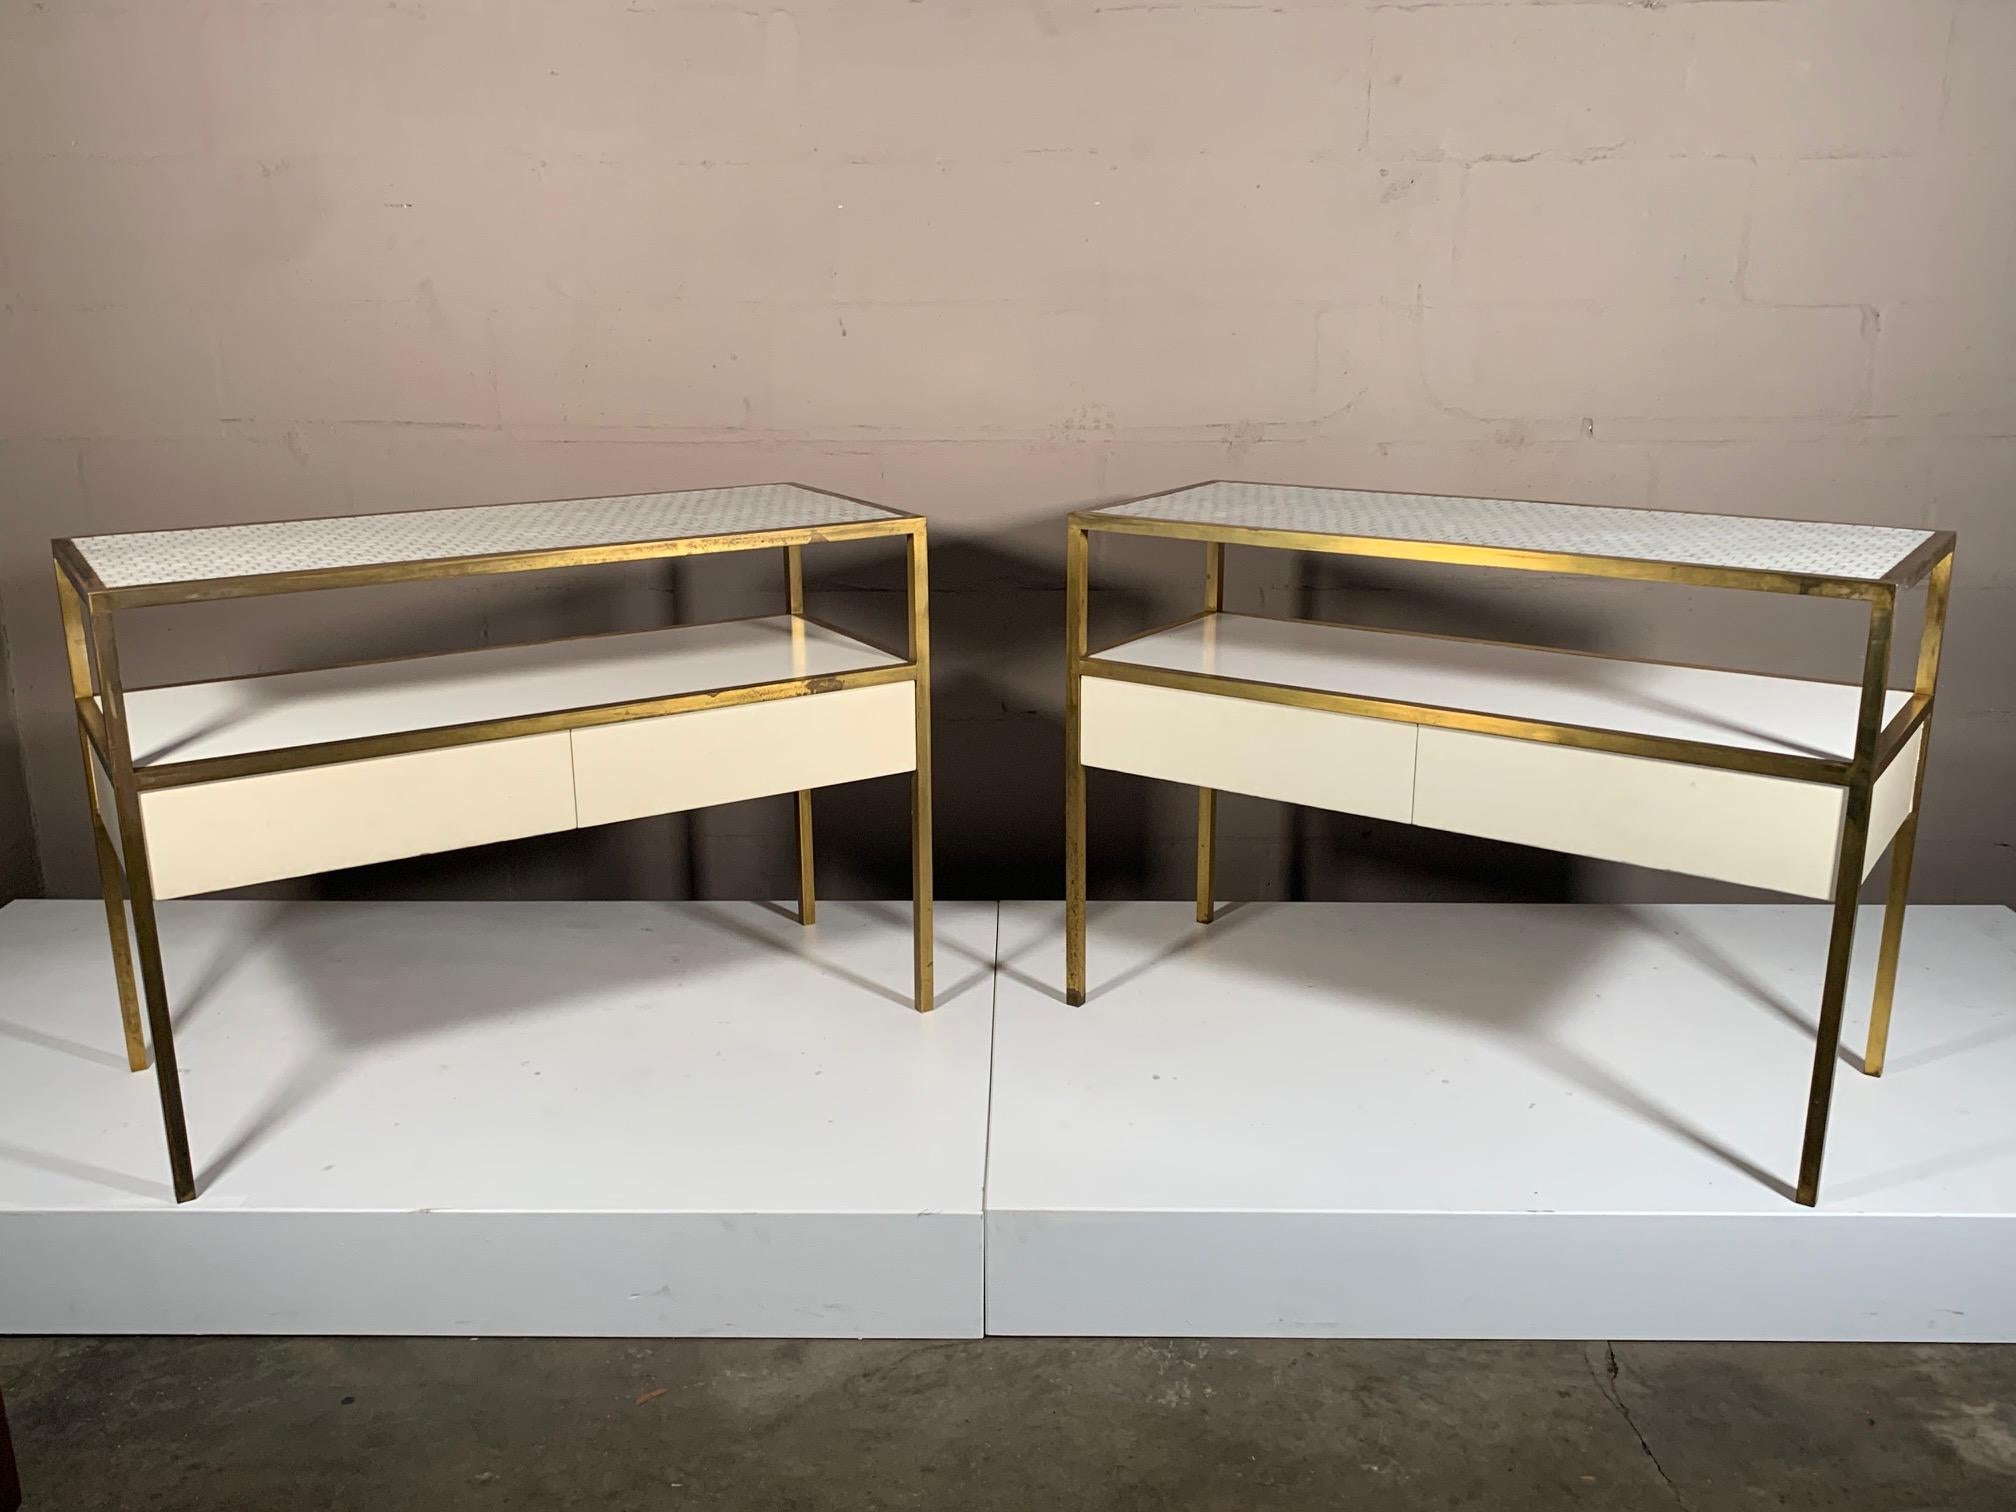 A pair of unusual tables, solid brass frames-heavy, with 2 lacquered drawers each on lower shelf, Murano tile tops. Could be end tables or low console tables or used together as a credenza.